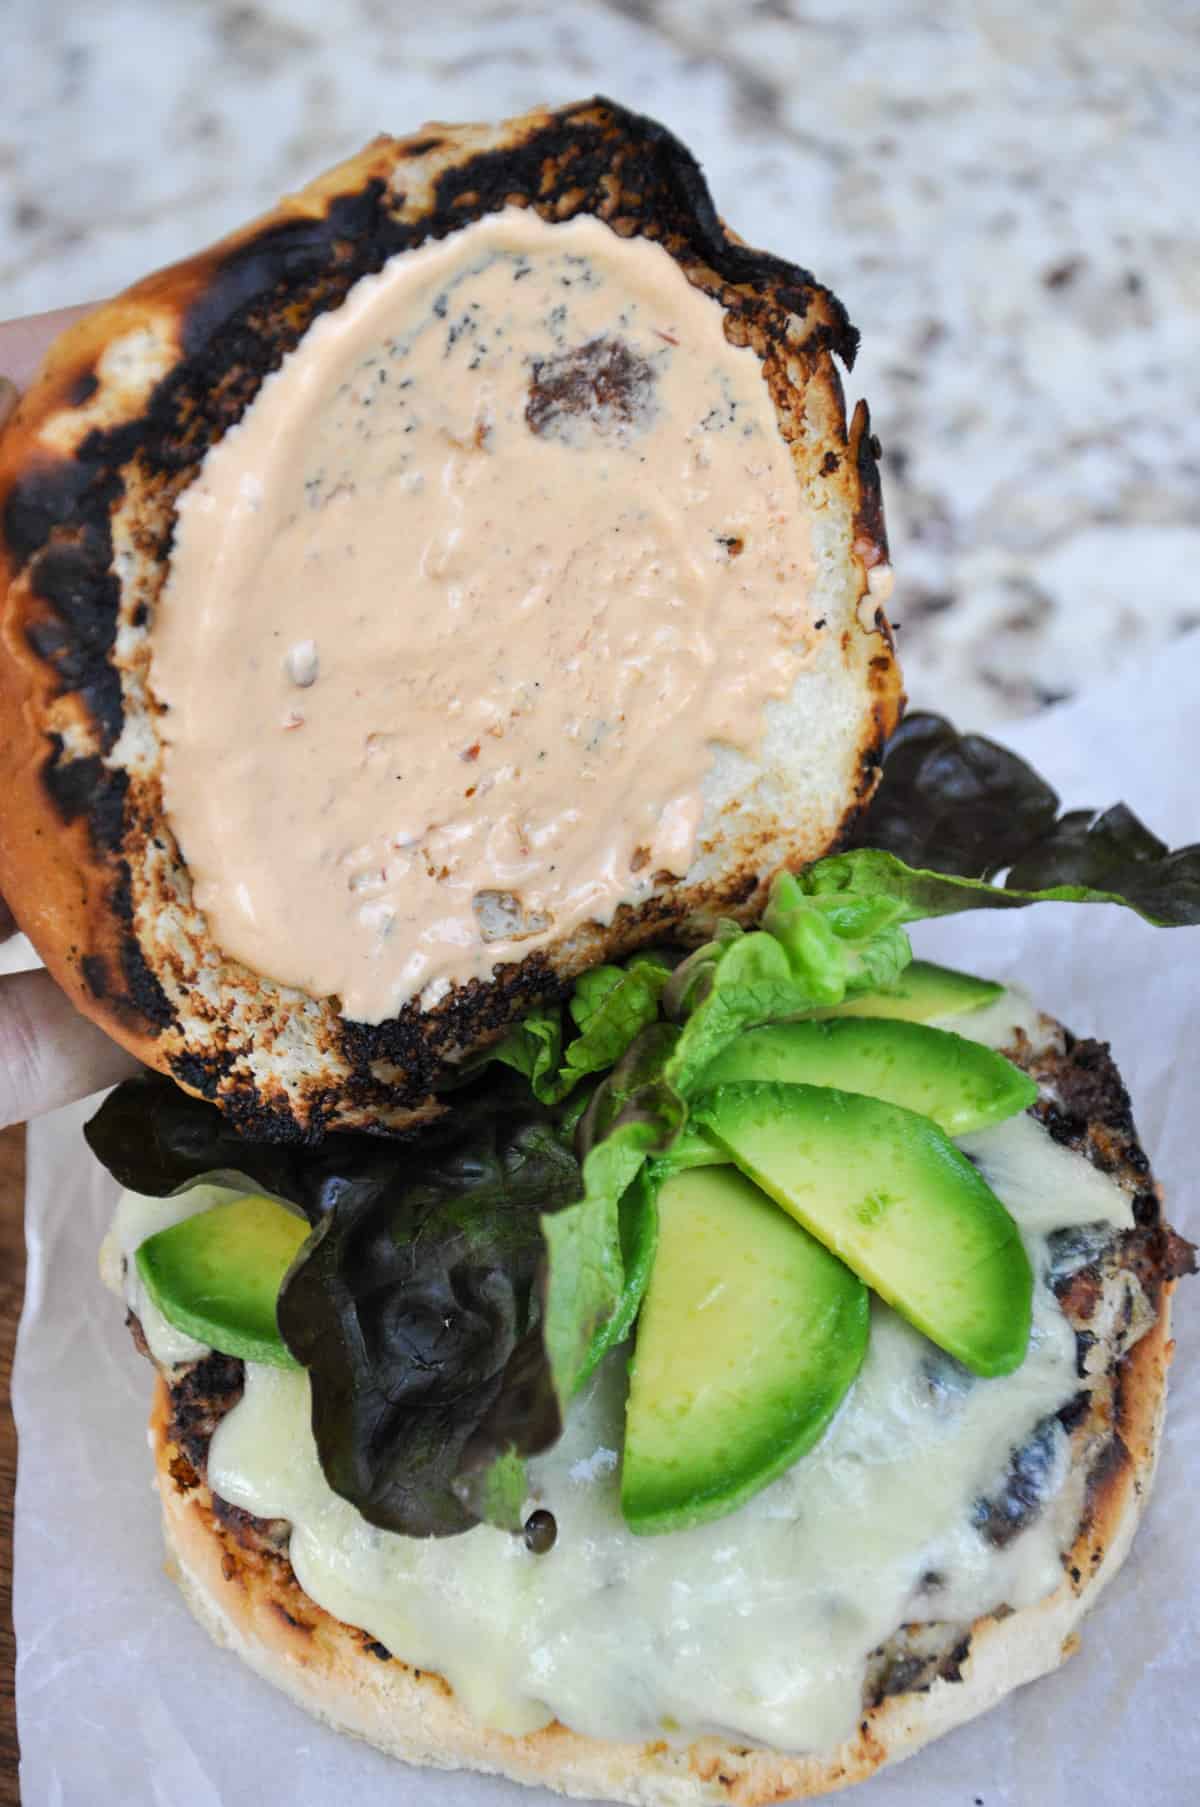 Additional chipotle aioli on other piece of bun 